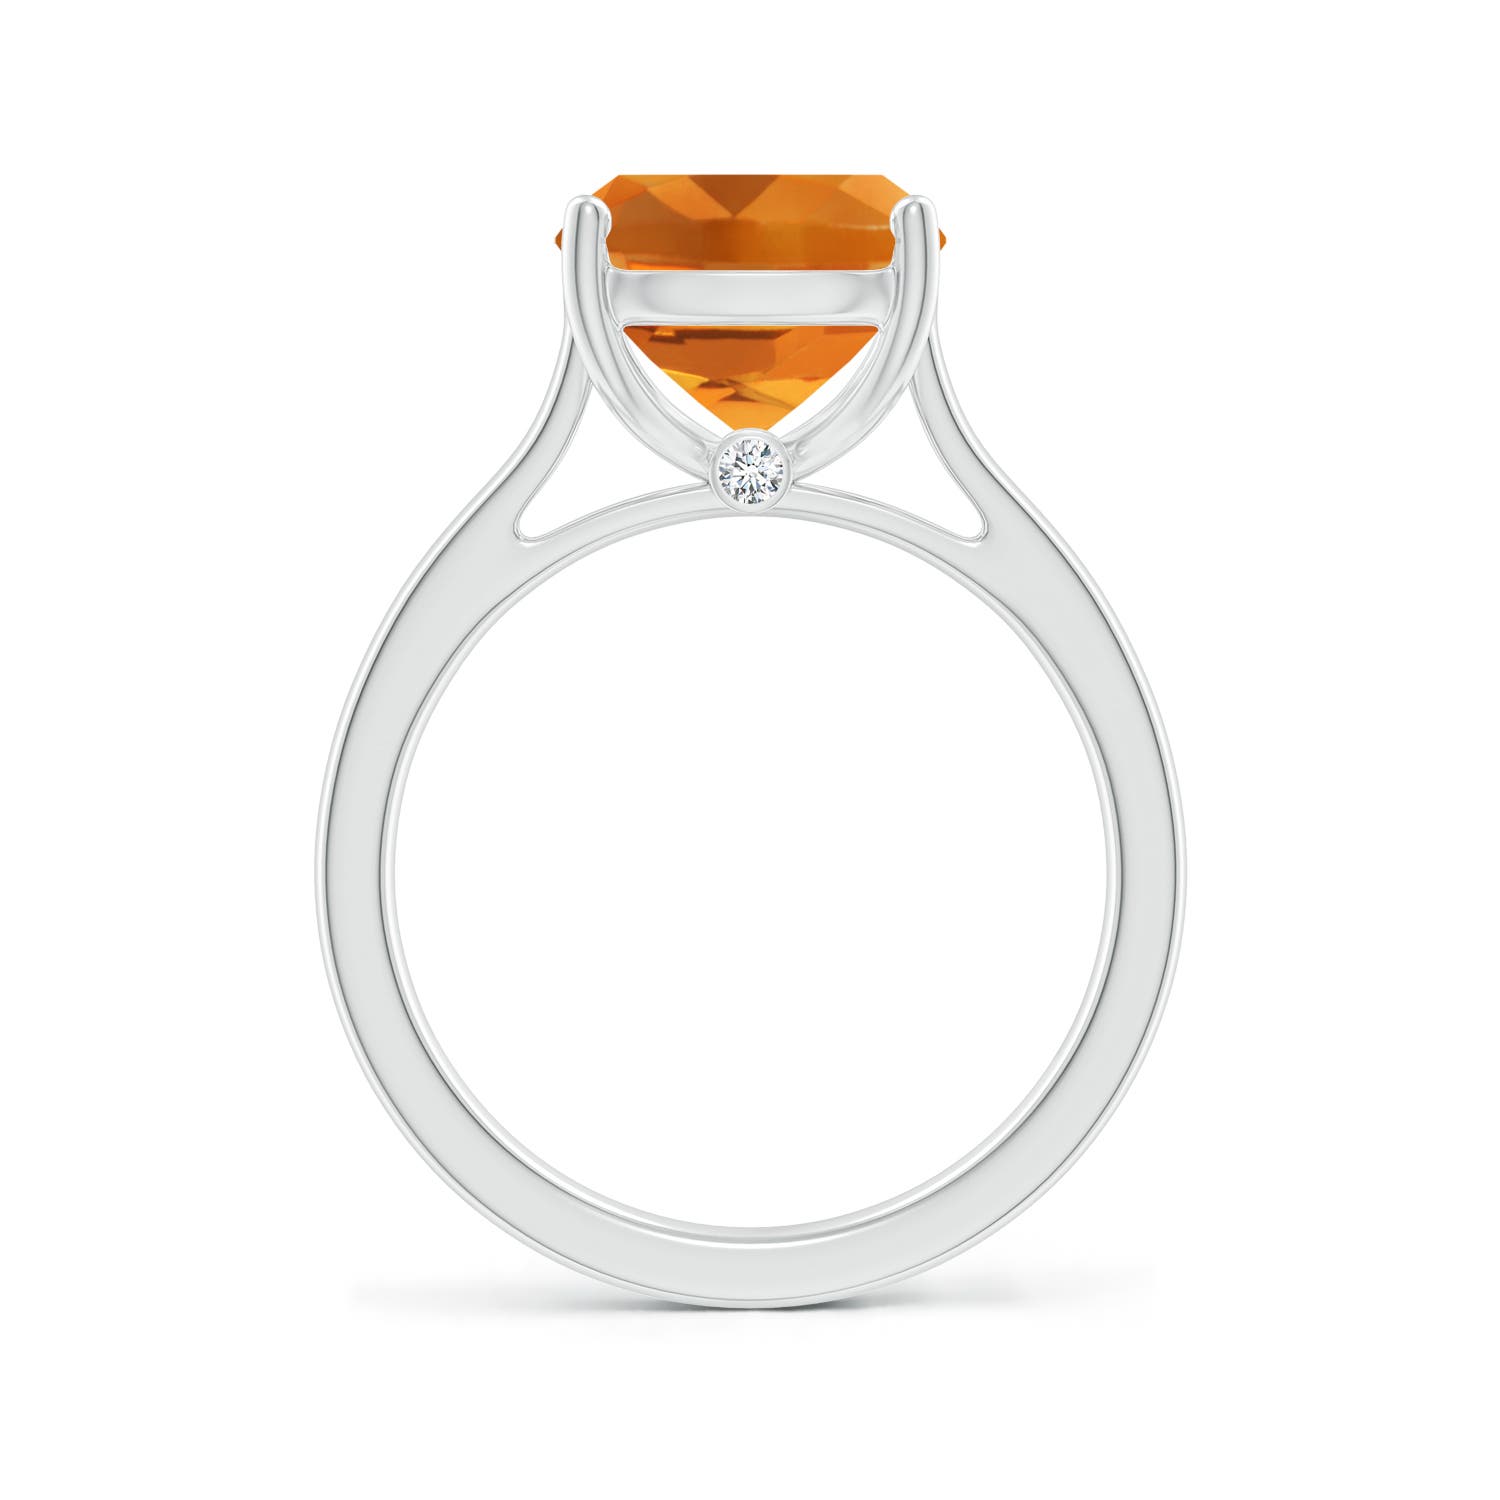 AAA - Citrine / 3.73 CT / 14 KT White Gold